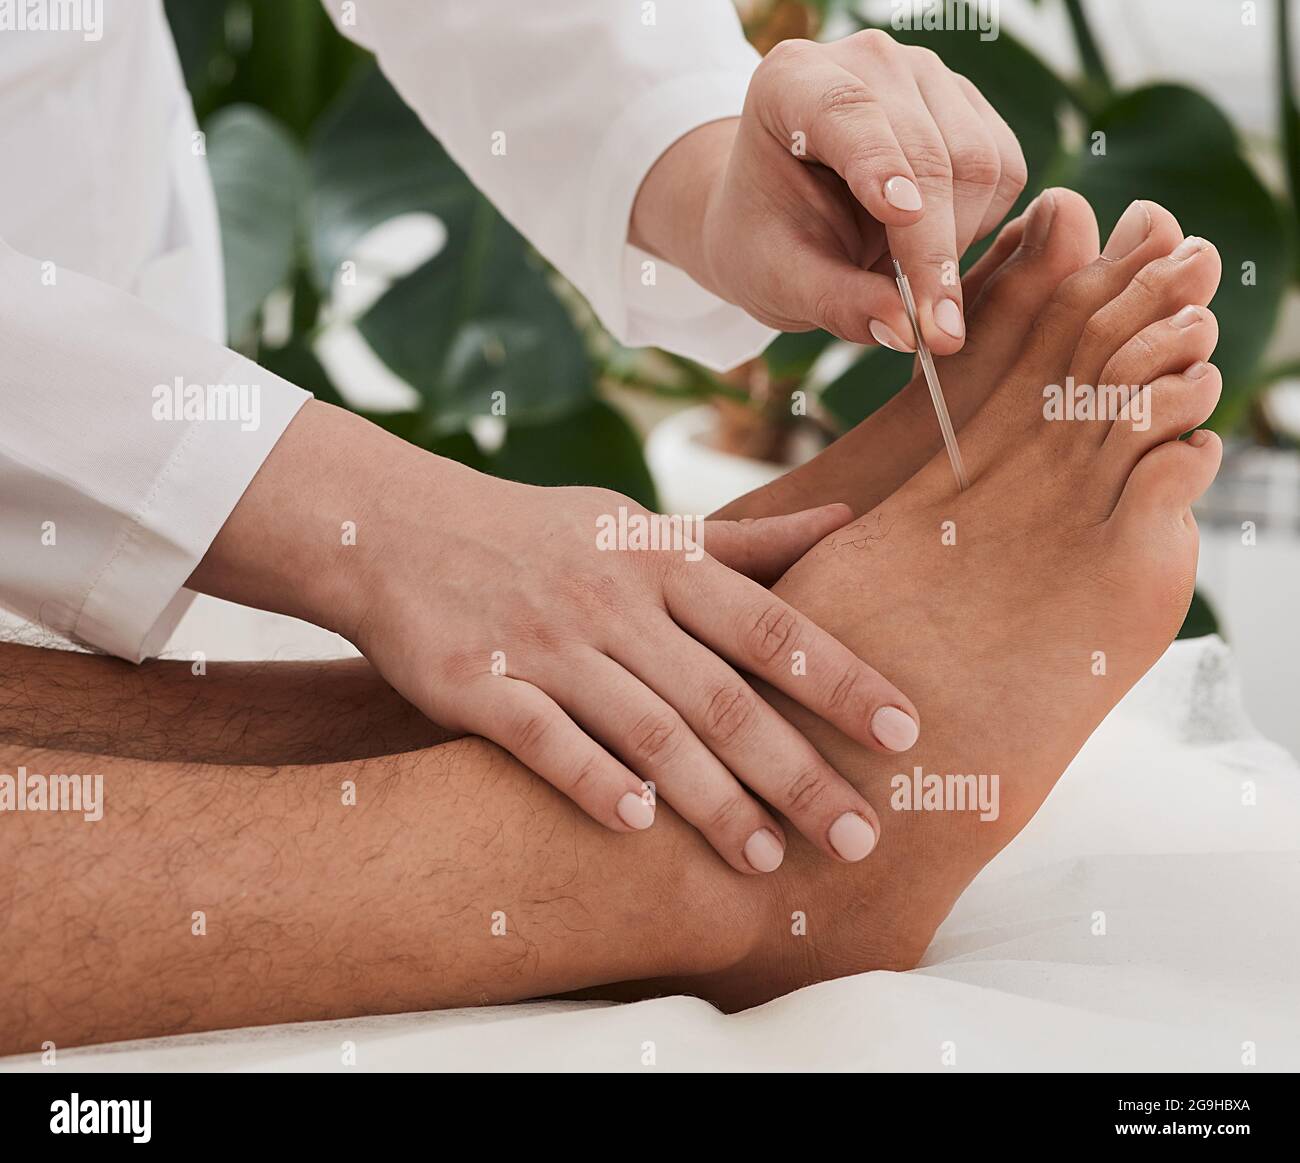 Acupuncture treatment for chronic foot pain. Chiropractor doing acupuncture therapy for patient feet with needles. Reflexology Stock Photo